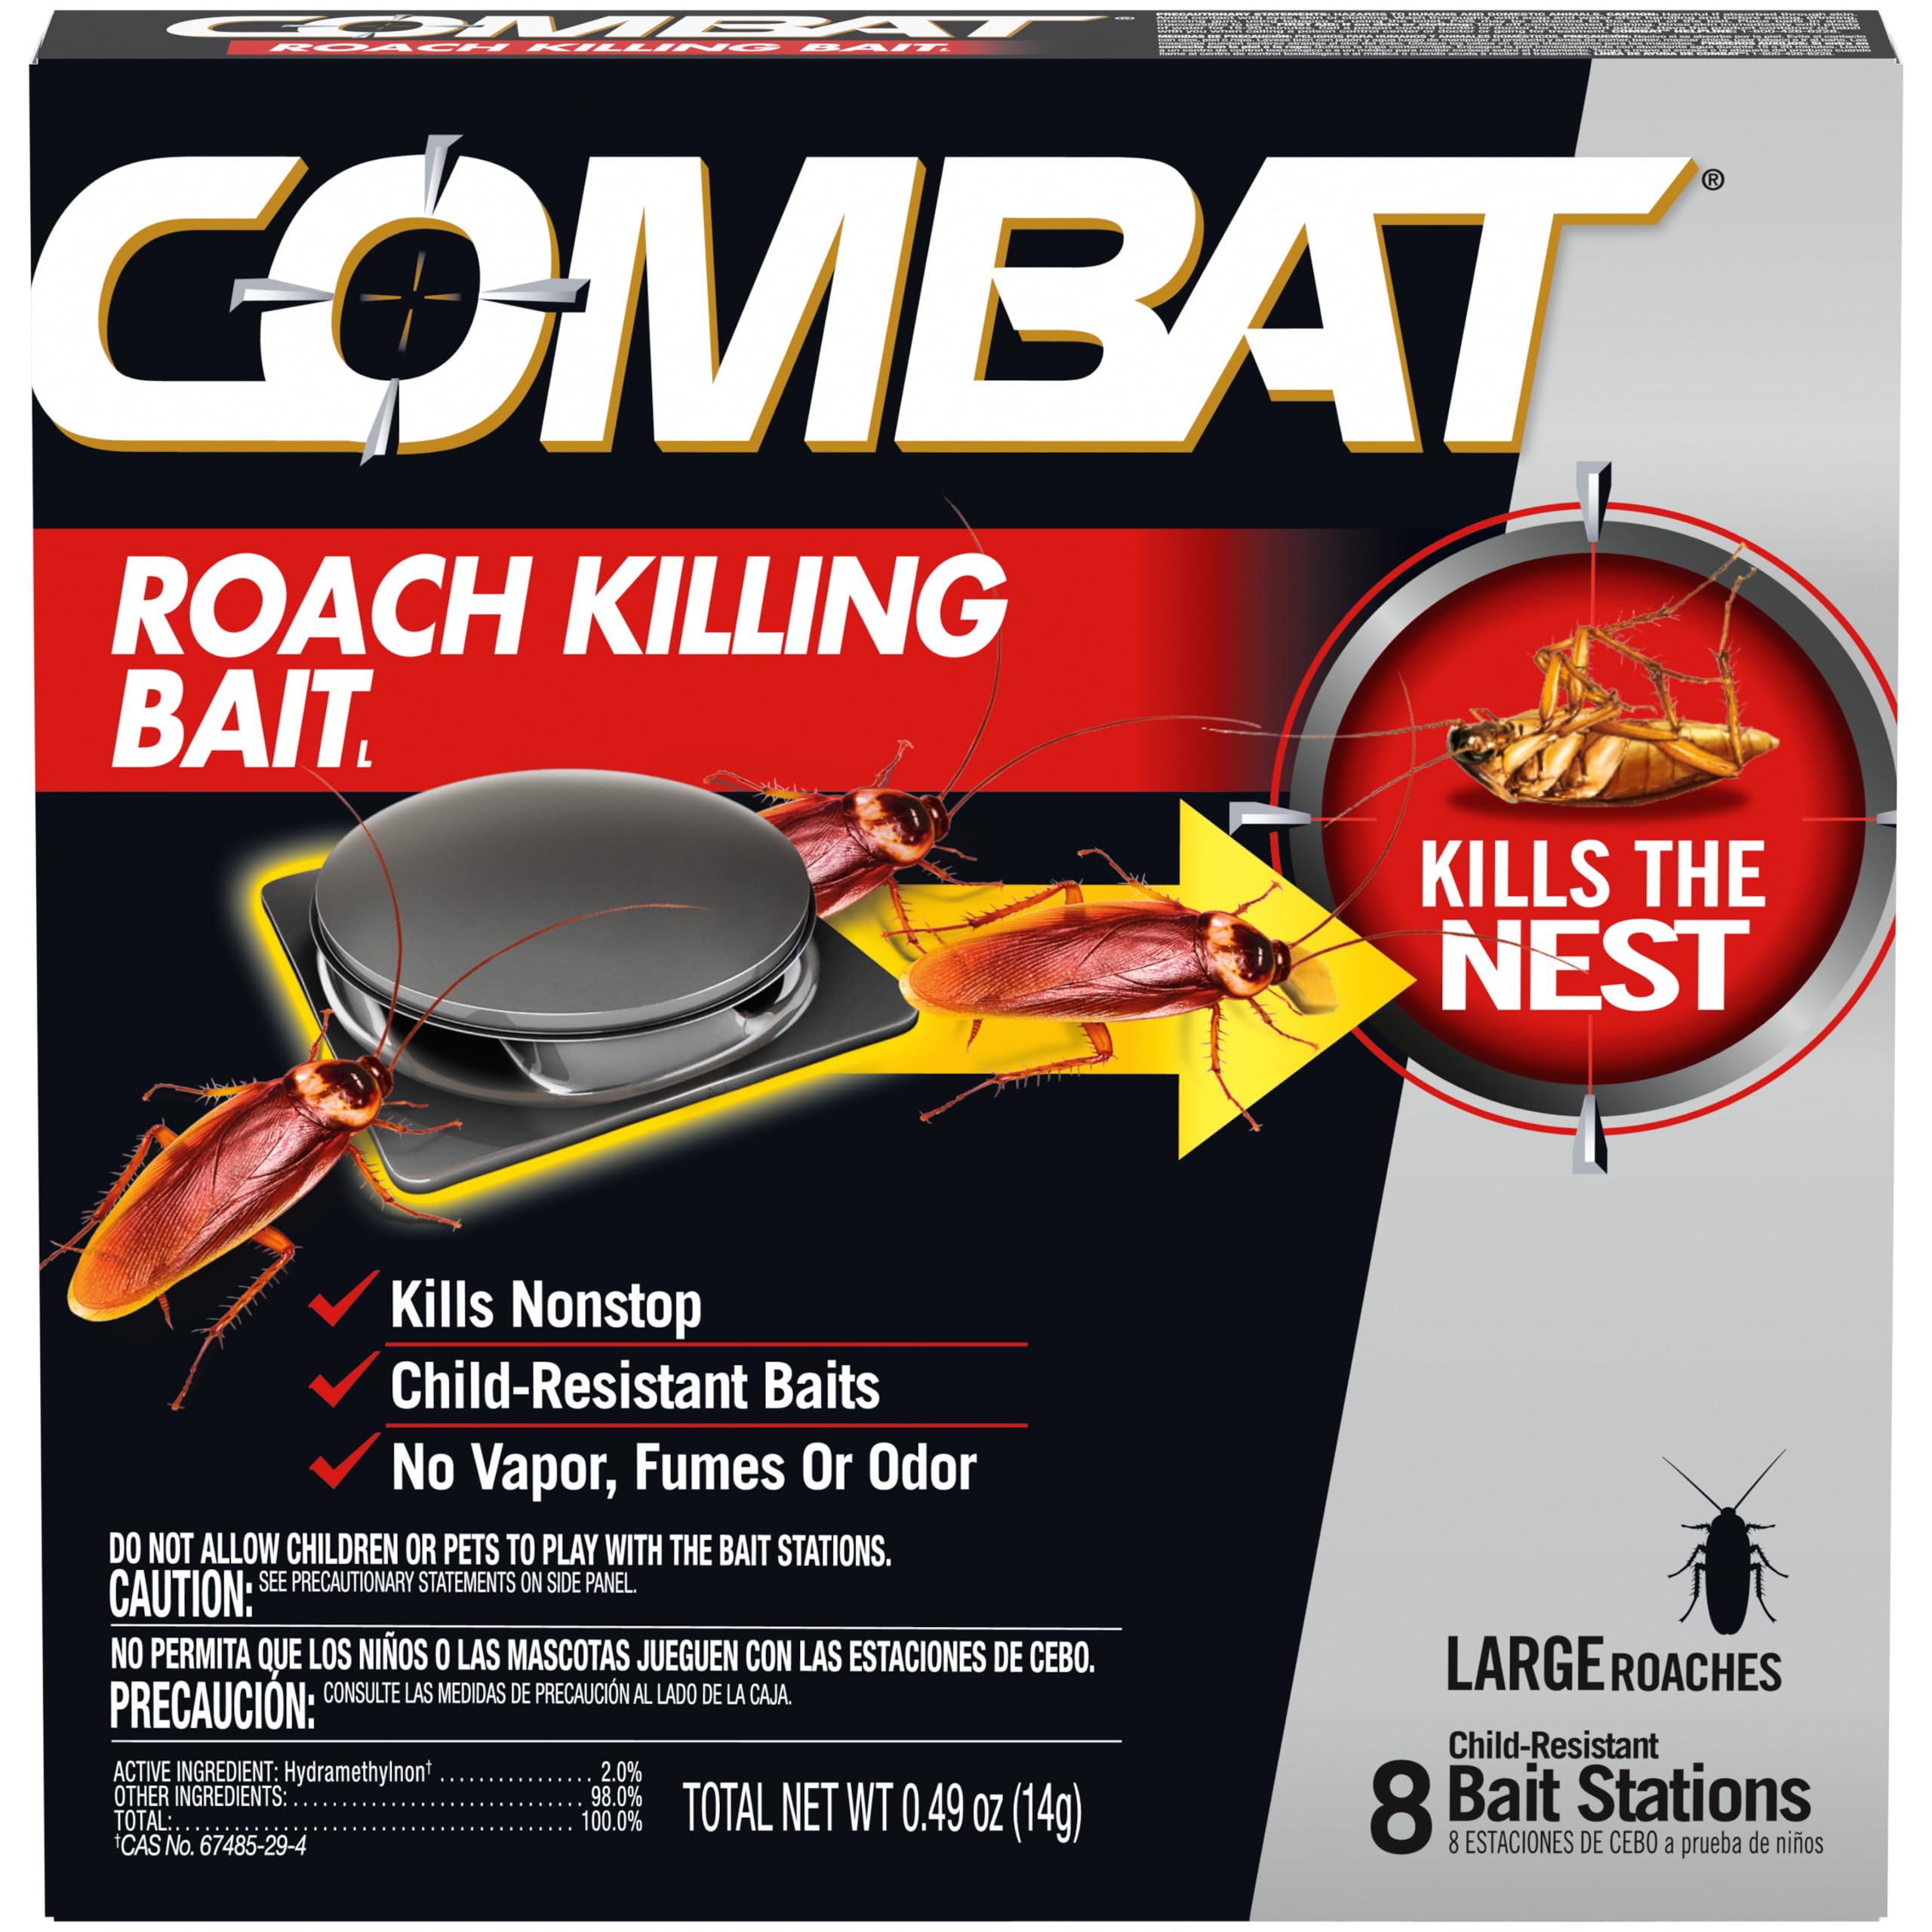 How to Bait Roaches?